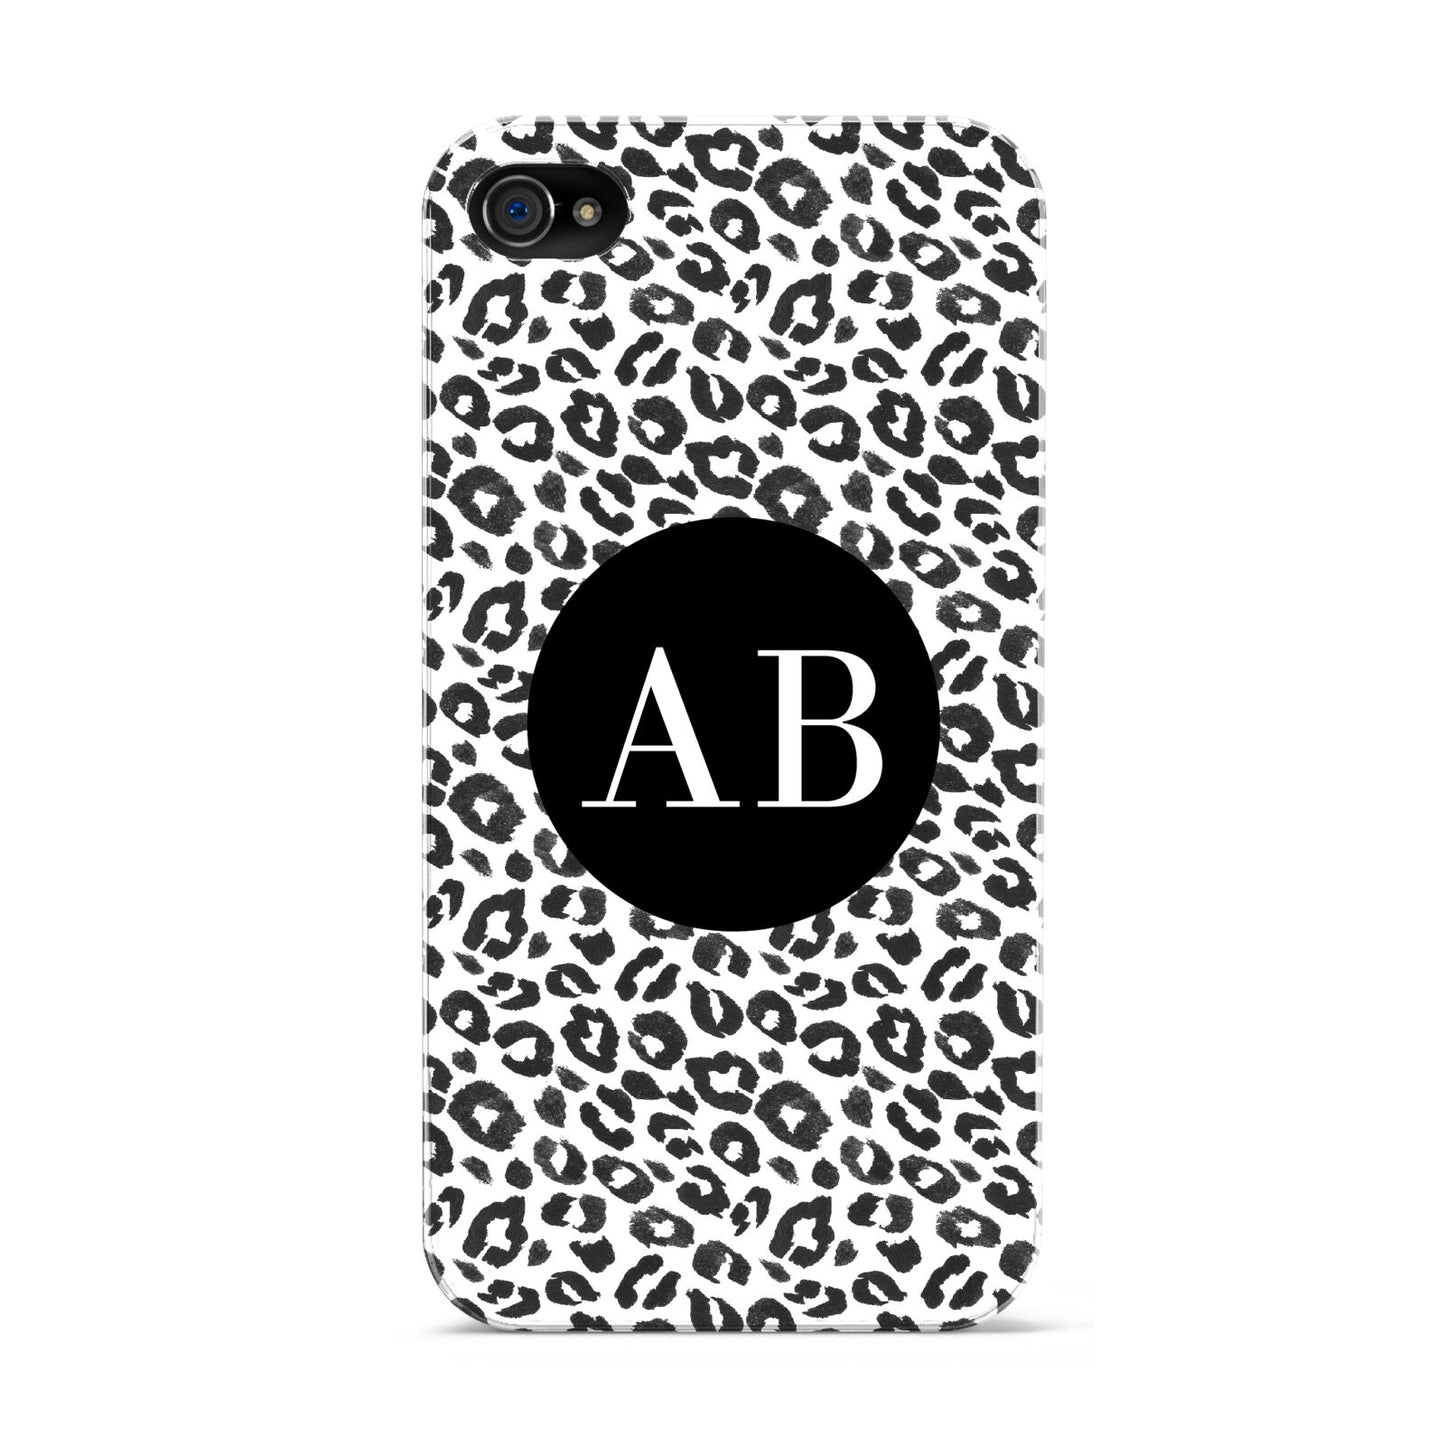 Leopard Print Black and White Apple iPhone 4s Case